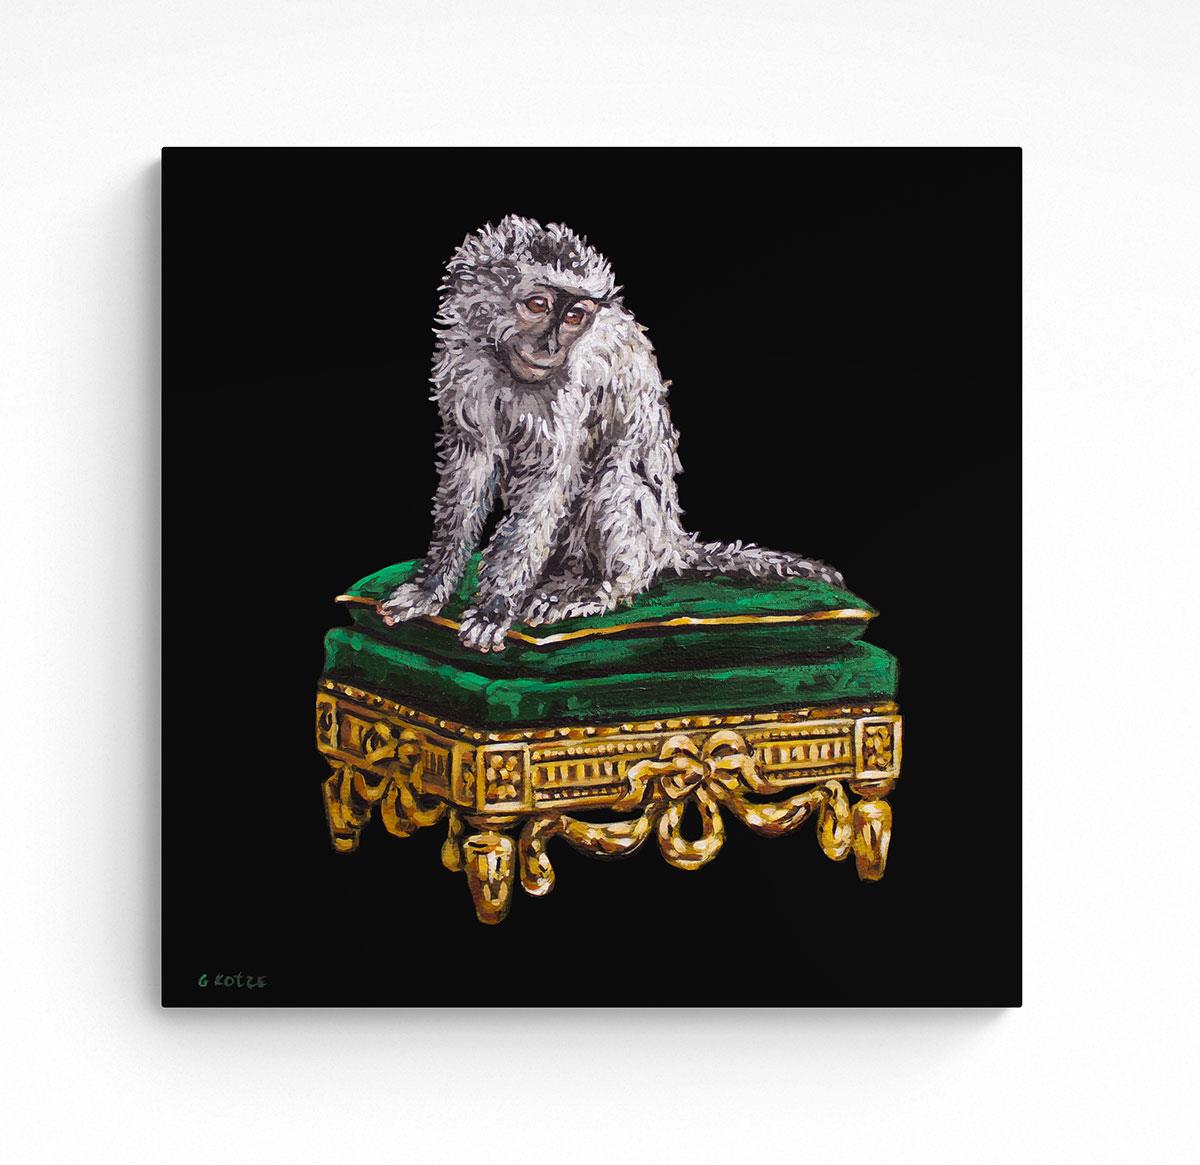 charming painting of a young monkey seated on an ornate green stool